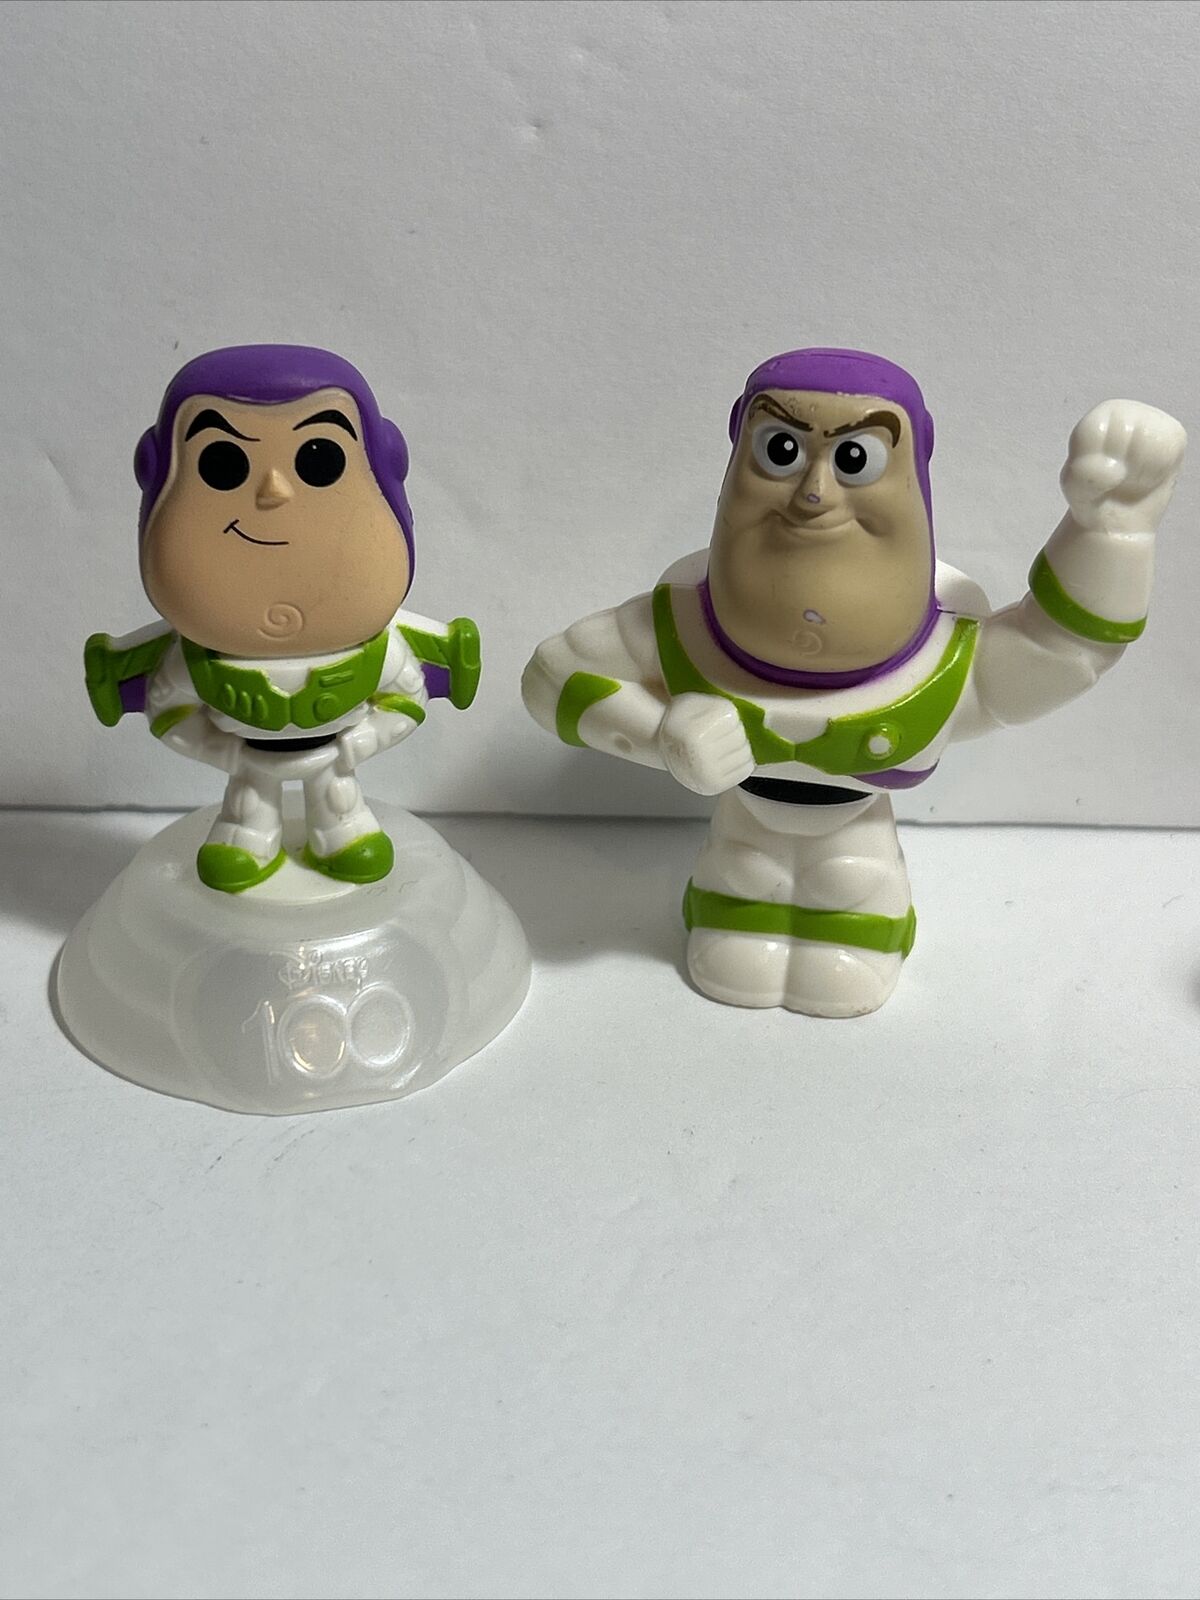 Lot Of 2 Buzz Lightyear Cake Toppers - Disney Pixar Toy Story - Small Fry